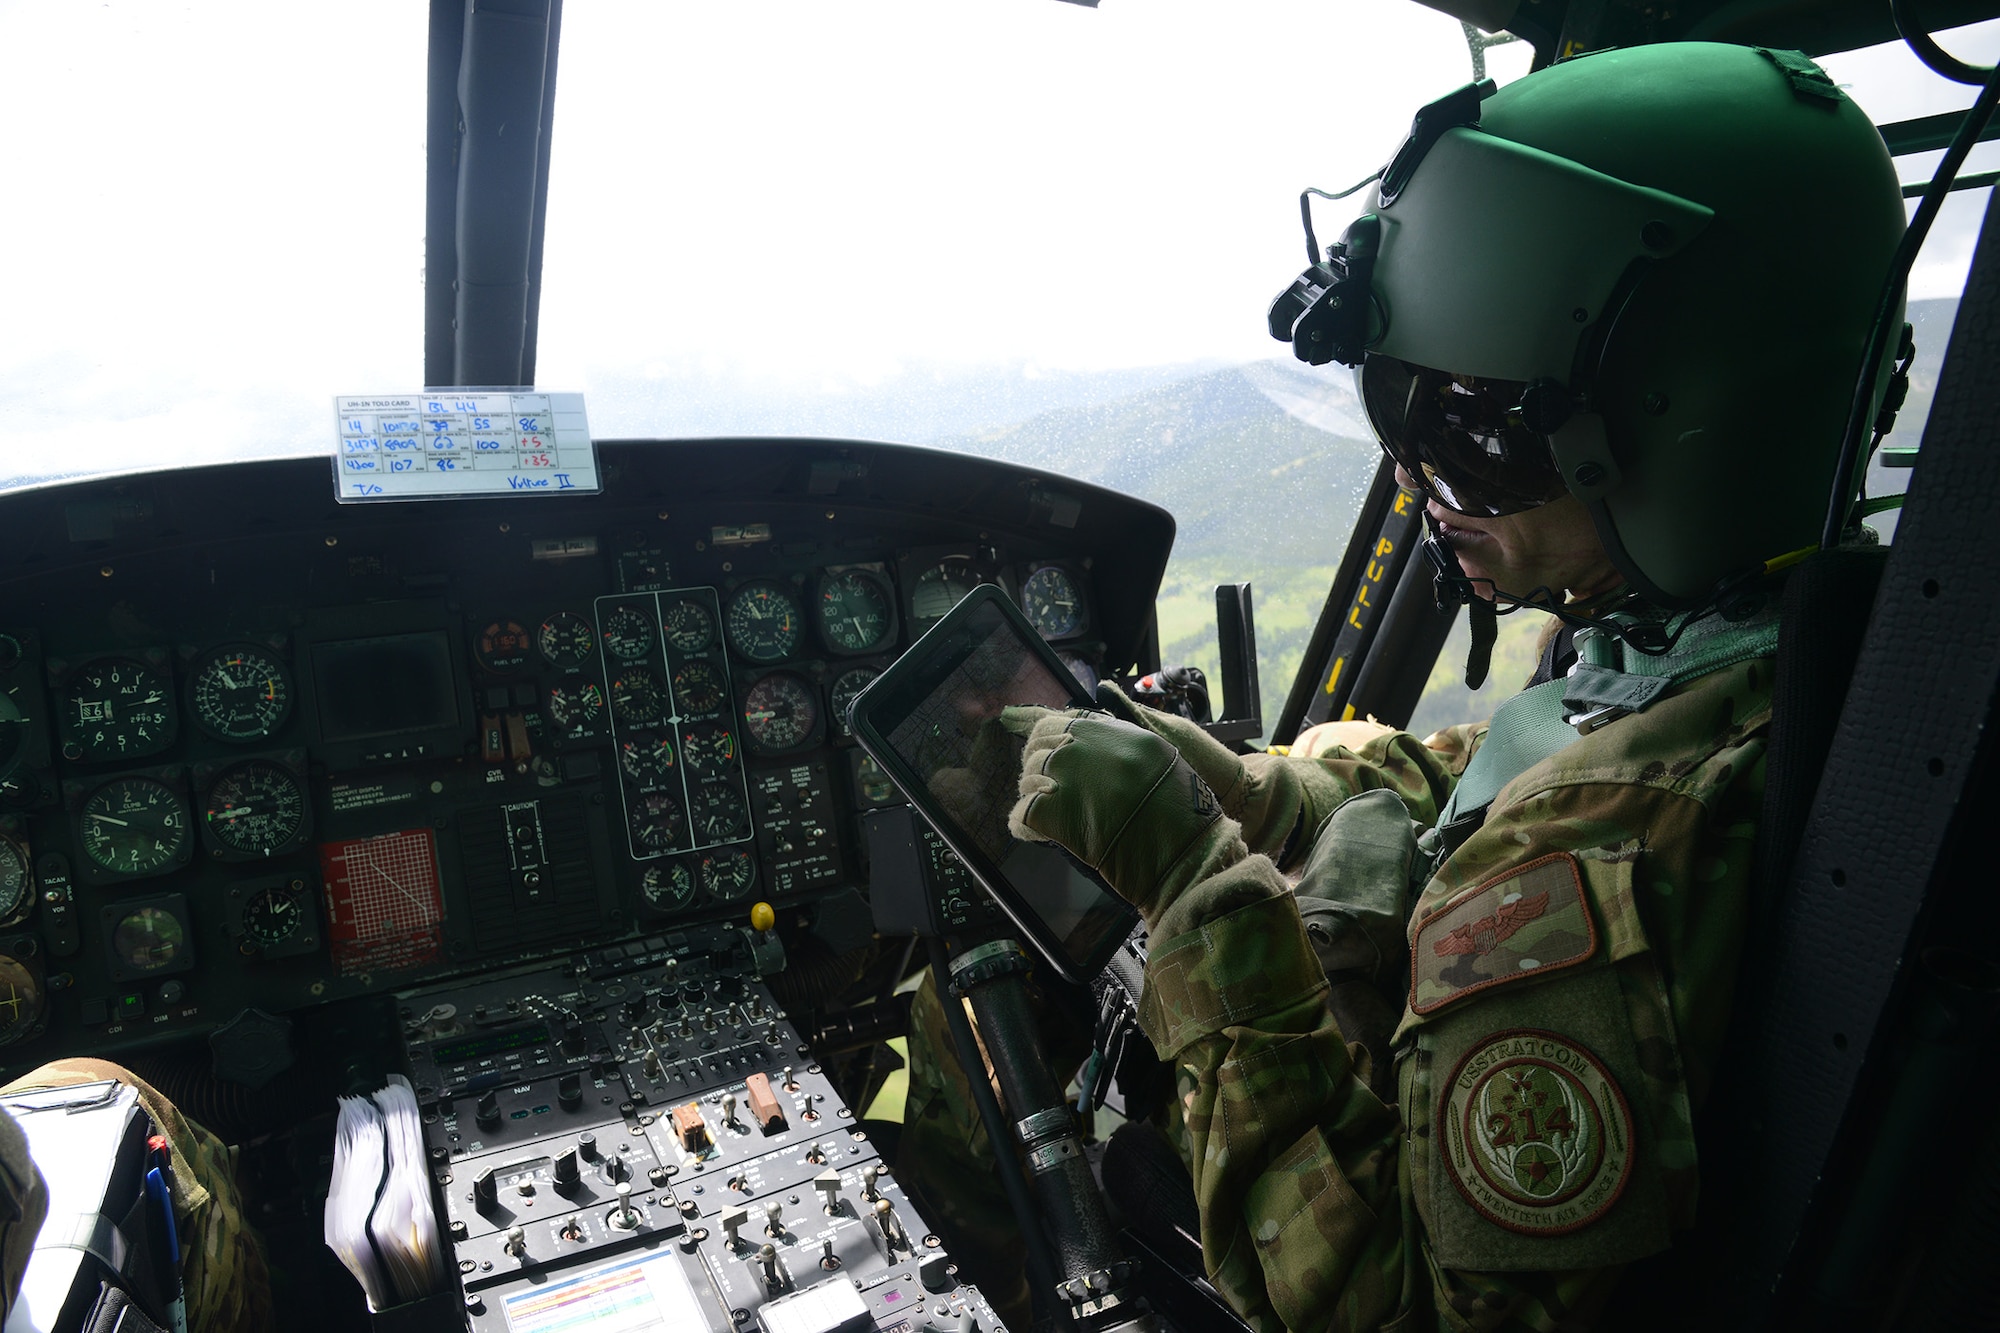 Capt. Greg Johnston, 40th Helicopter Squadron UH-1N Iriquois pilot, checks a topographical map for obstacles in the flight path July 6, 2016, near Malmstrom Air Force Base, Mont. Pilots and flight engineers refer to the map when routing flight paths especially when they encounter obstacles such as weather or restricted air space. (U.S. Air Force photo/Staff Sgt. Delia Marchick)